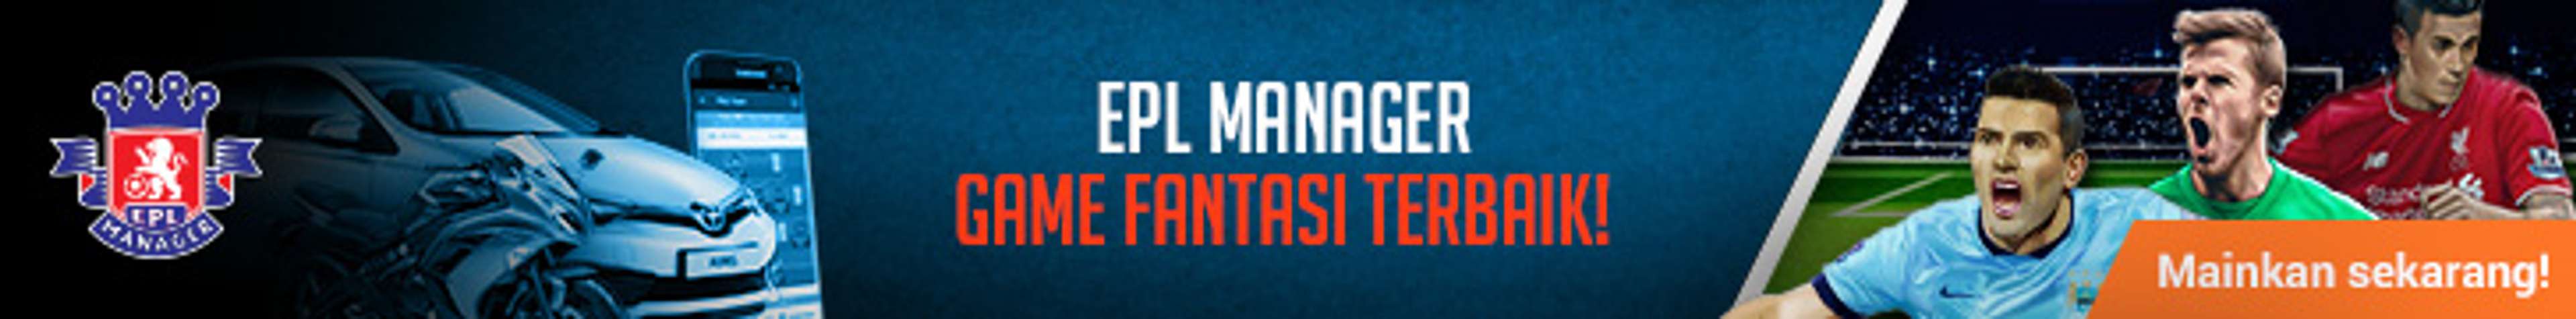 Banner ID - EPL Manager